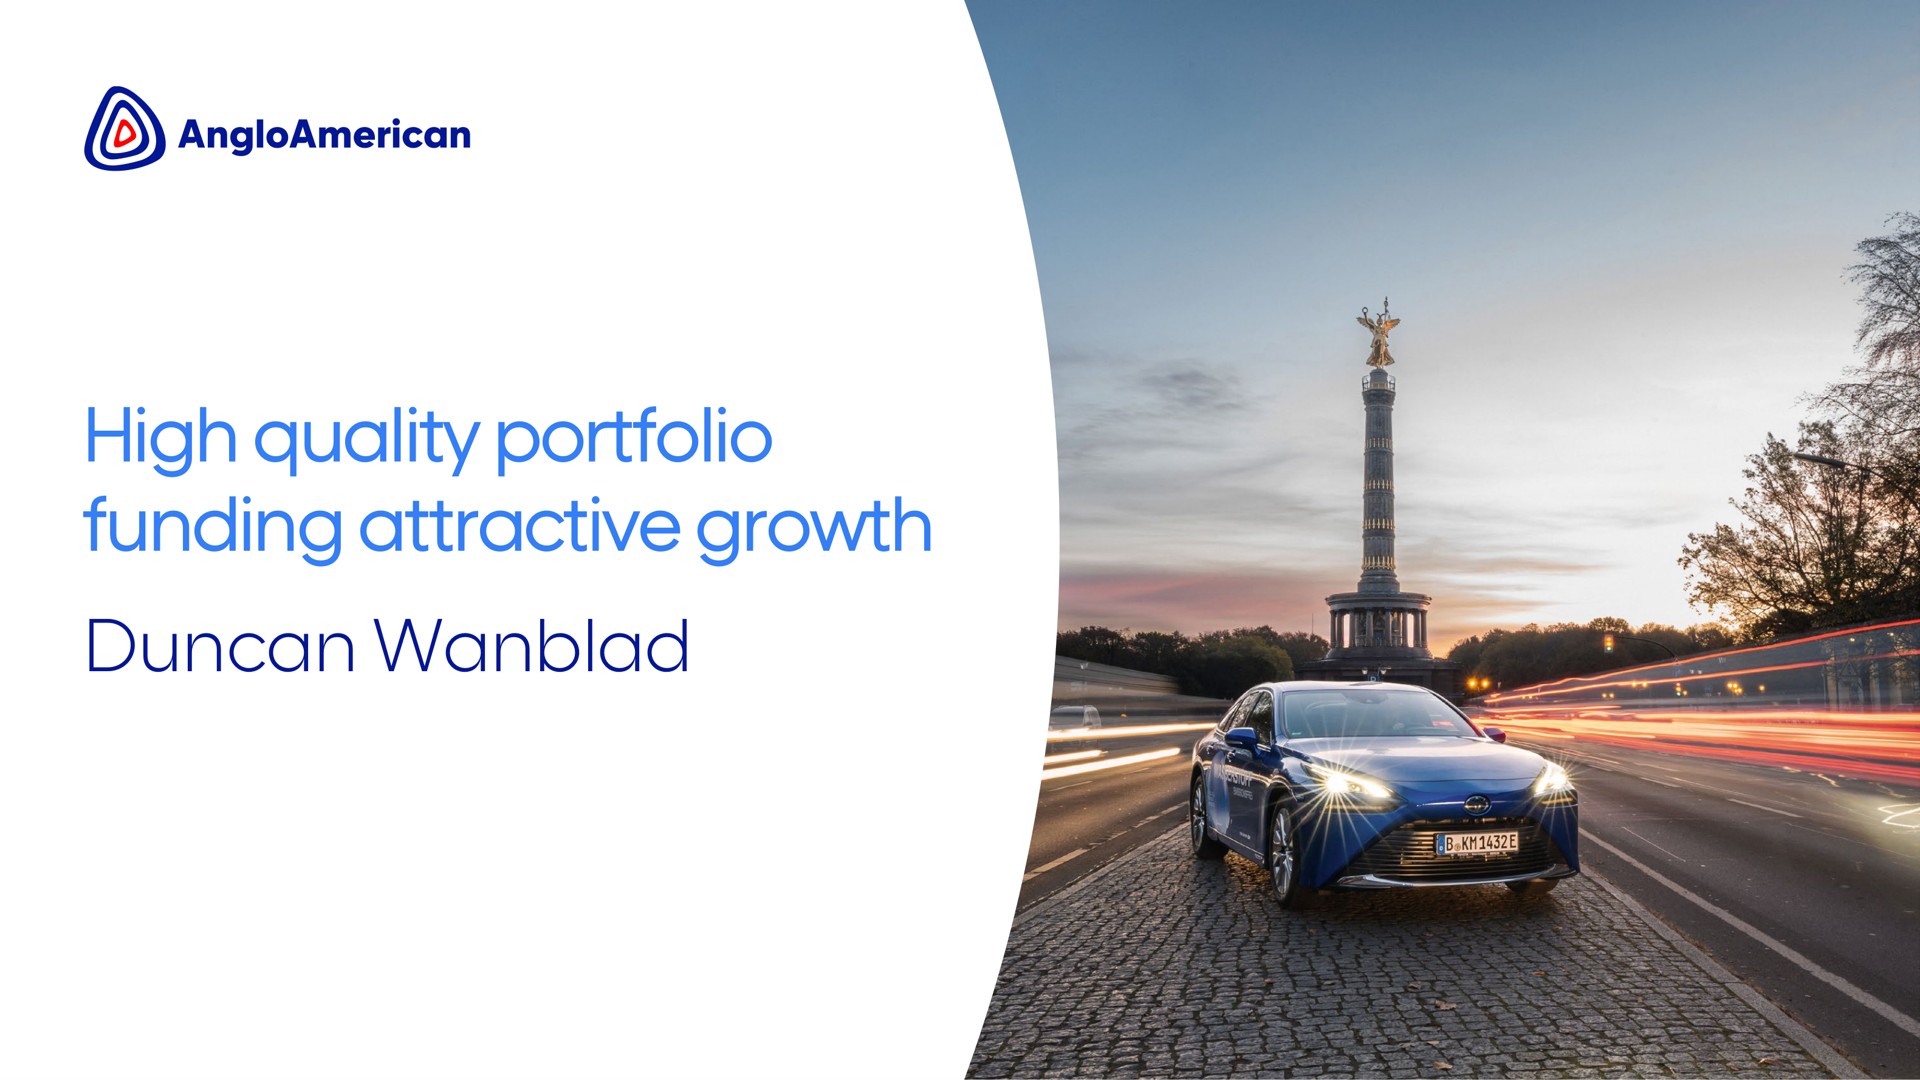 high quality portfolio funding attractive growth | AngloAmerican